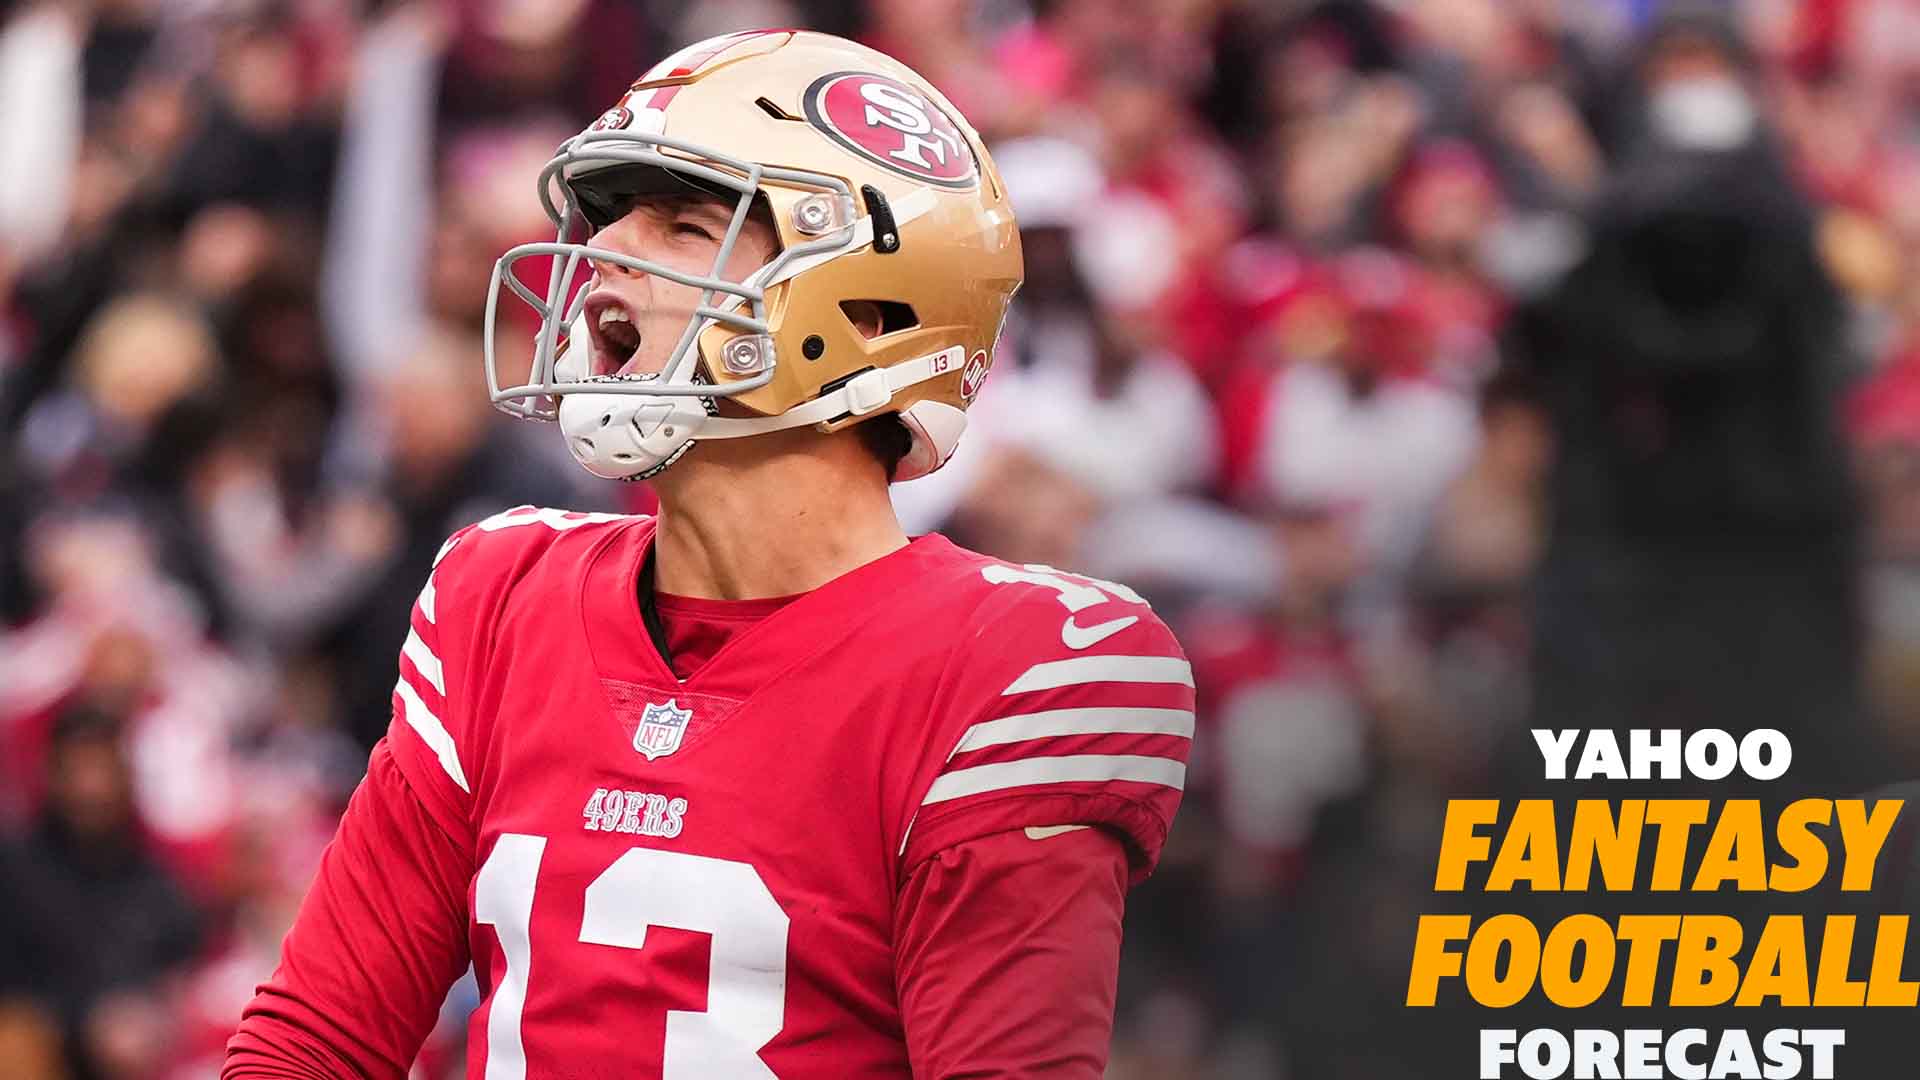 Daily Fantasy Football: Picks and strategy for wild-card Saturday